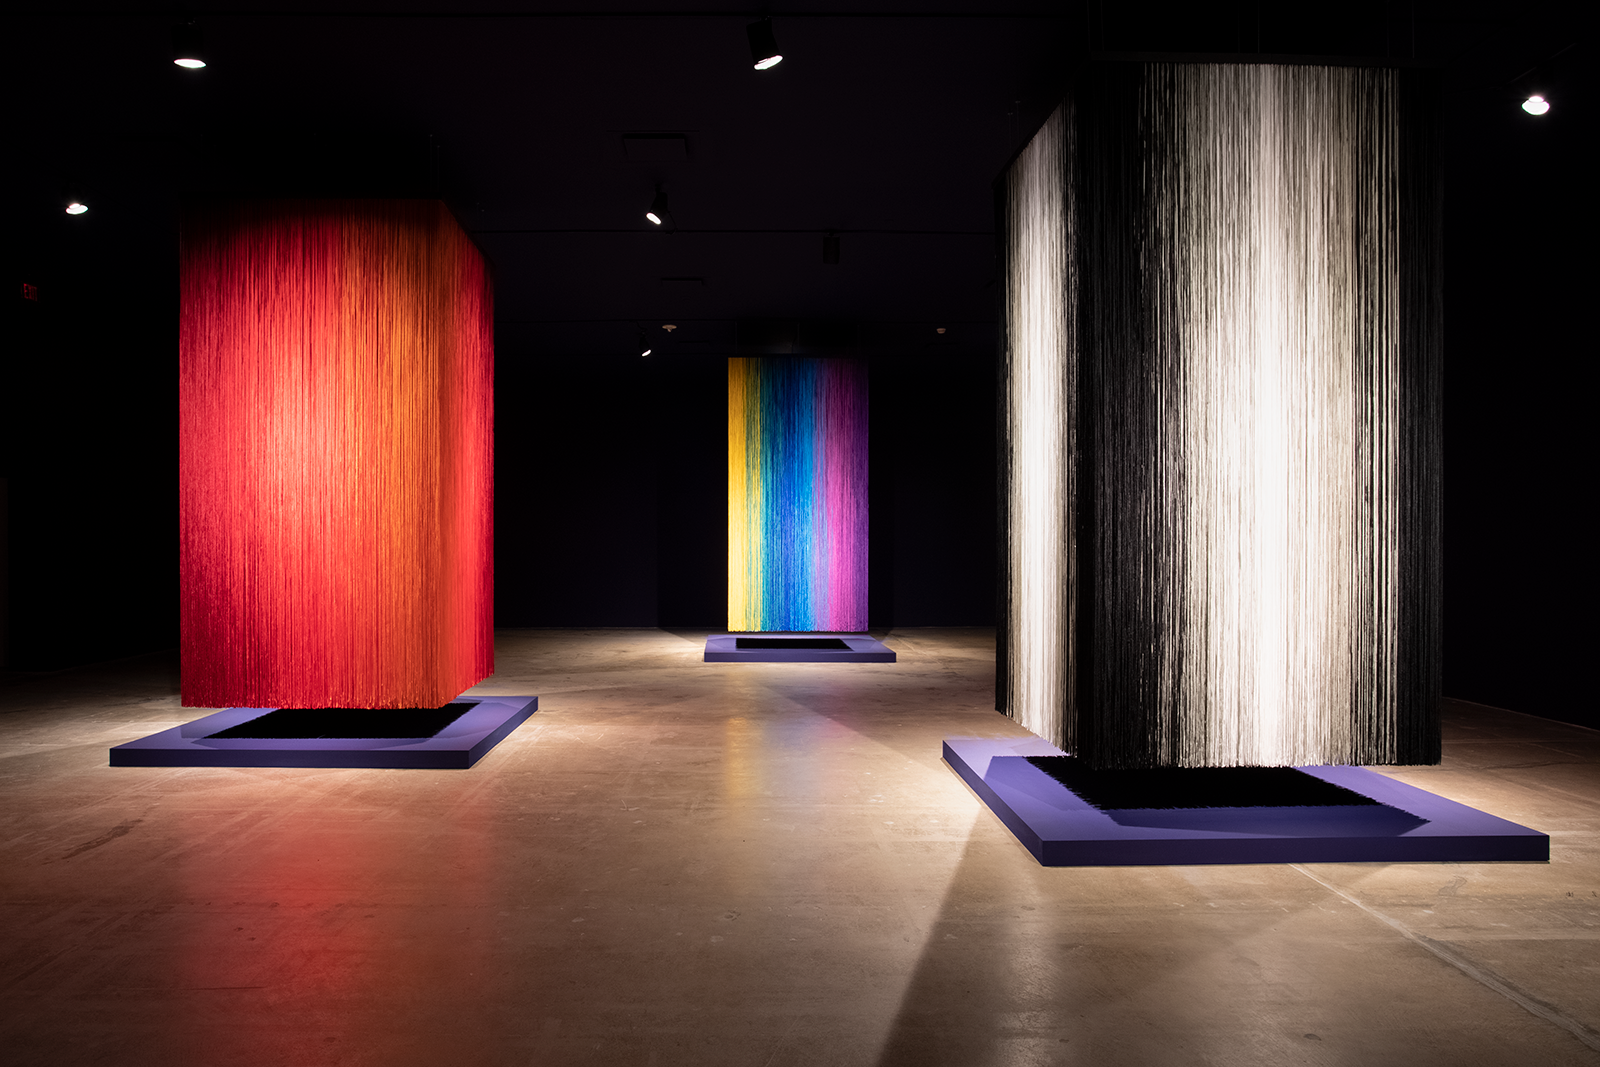 Three cube-shaped sculptures made of different colors of shawl fringe handing from the ceiling